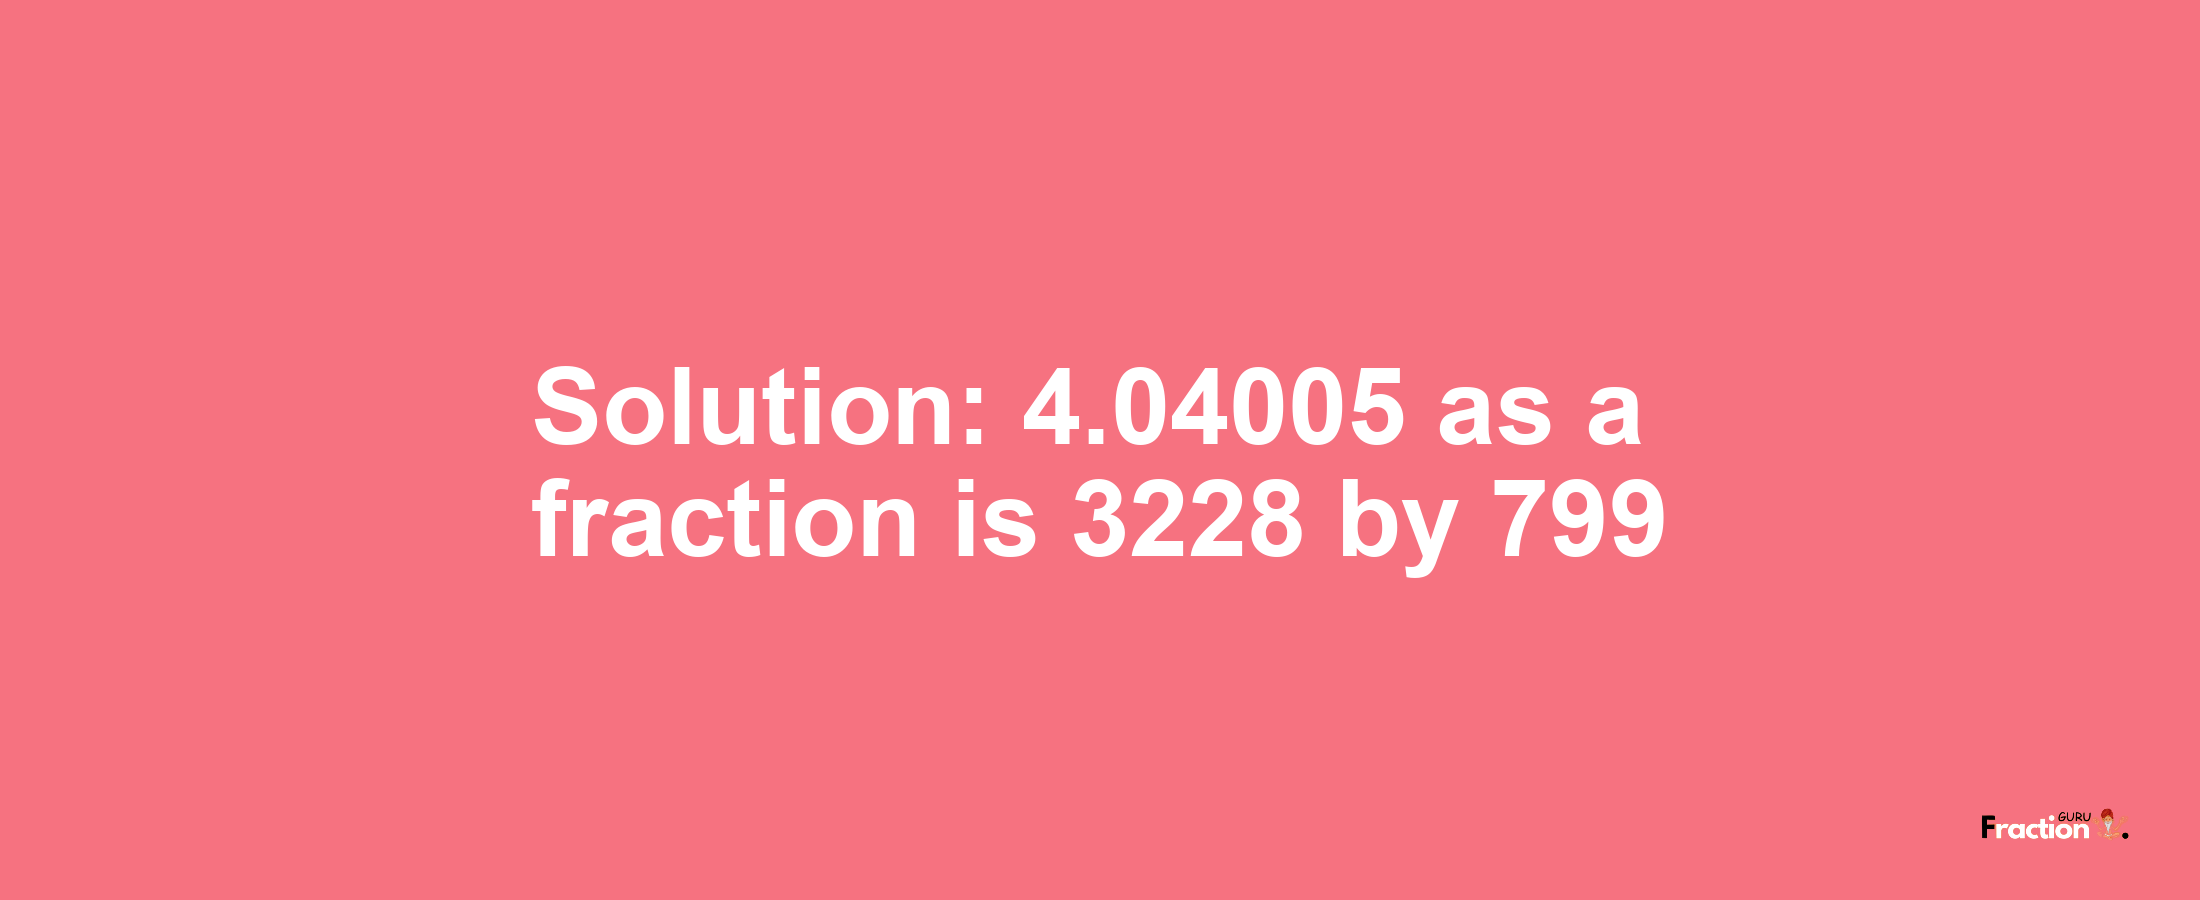 Solution:4.04005 as a fraction is 3228/799